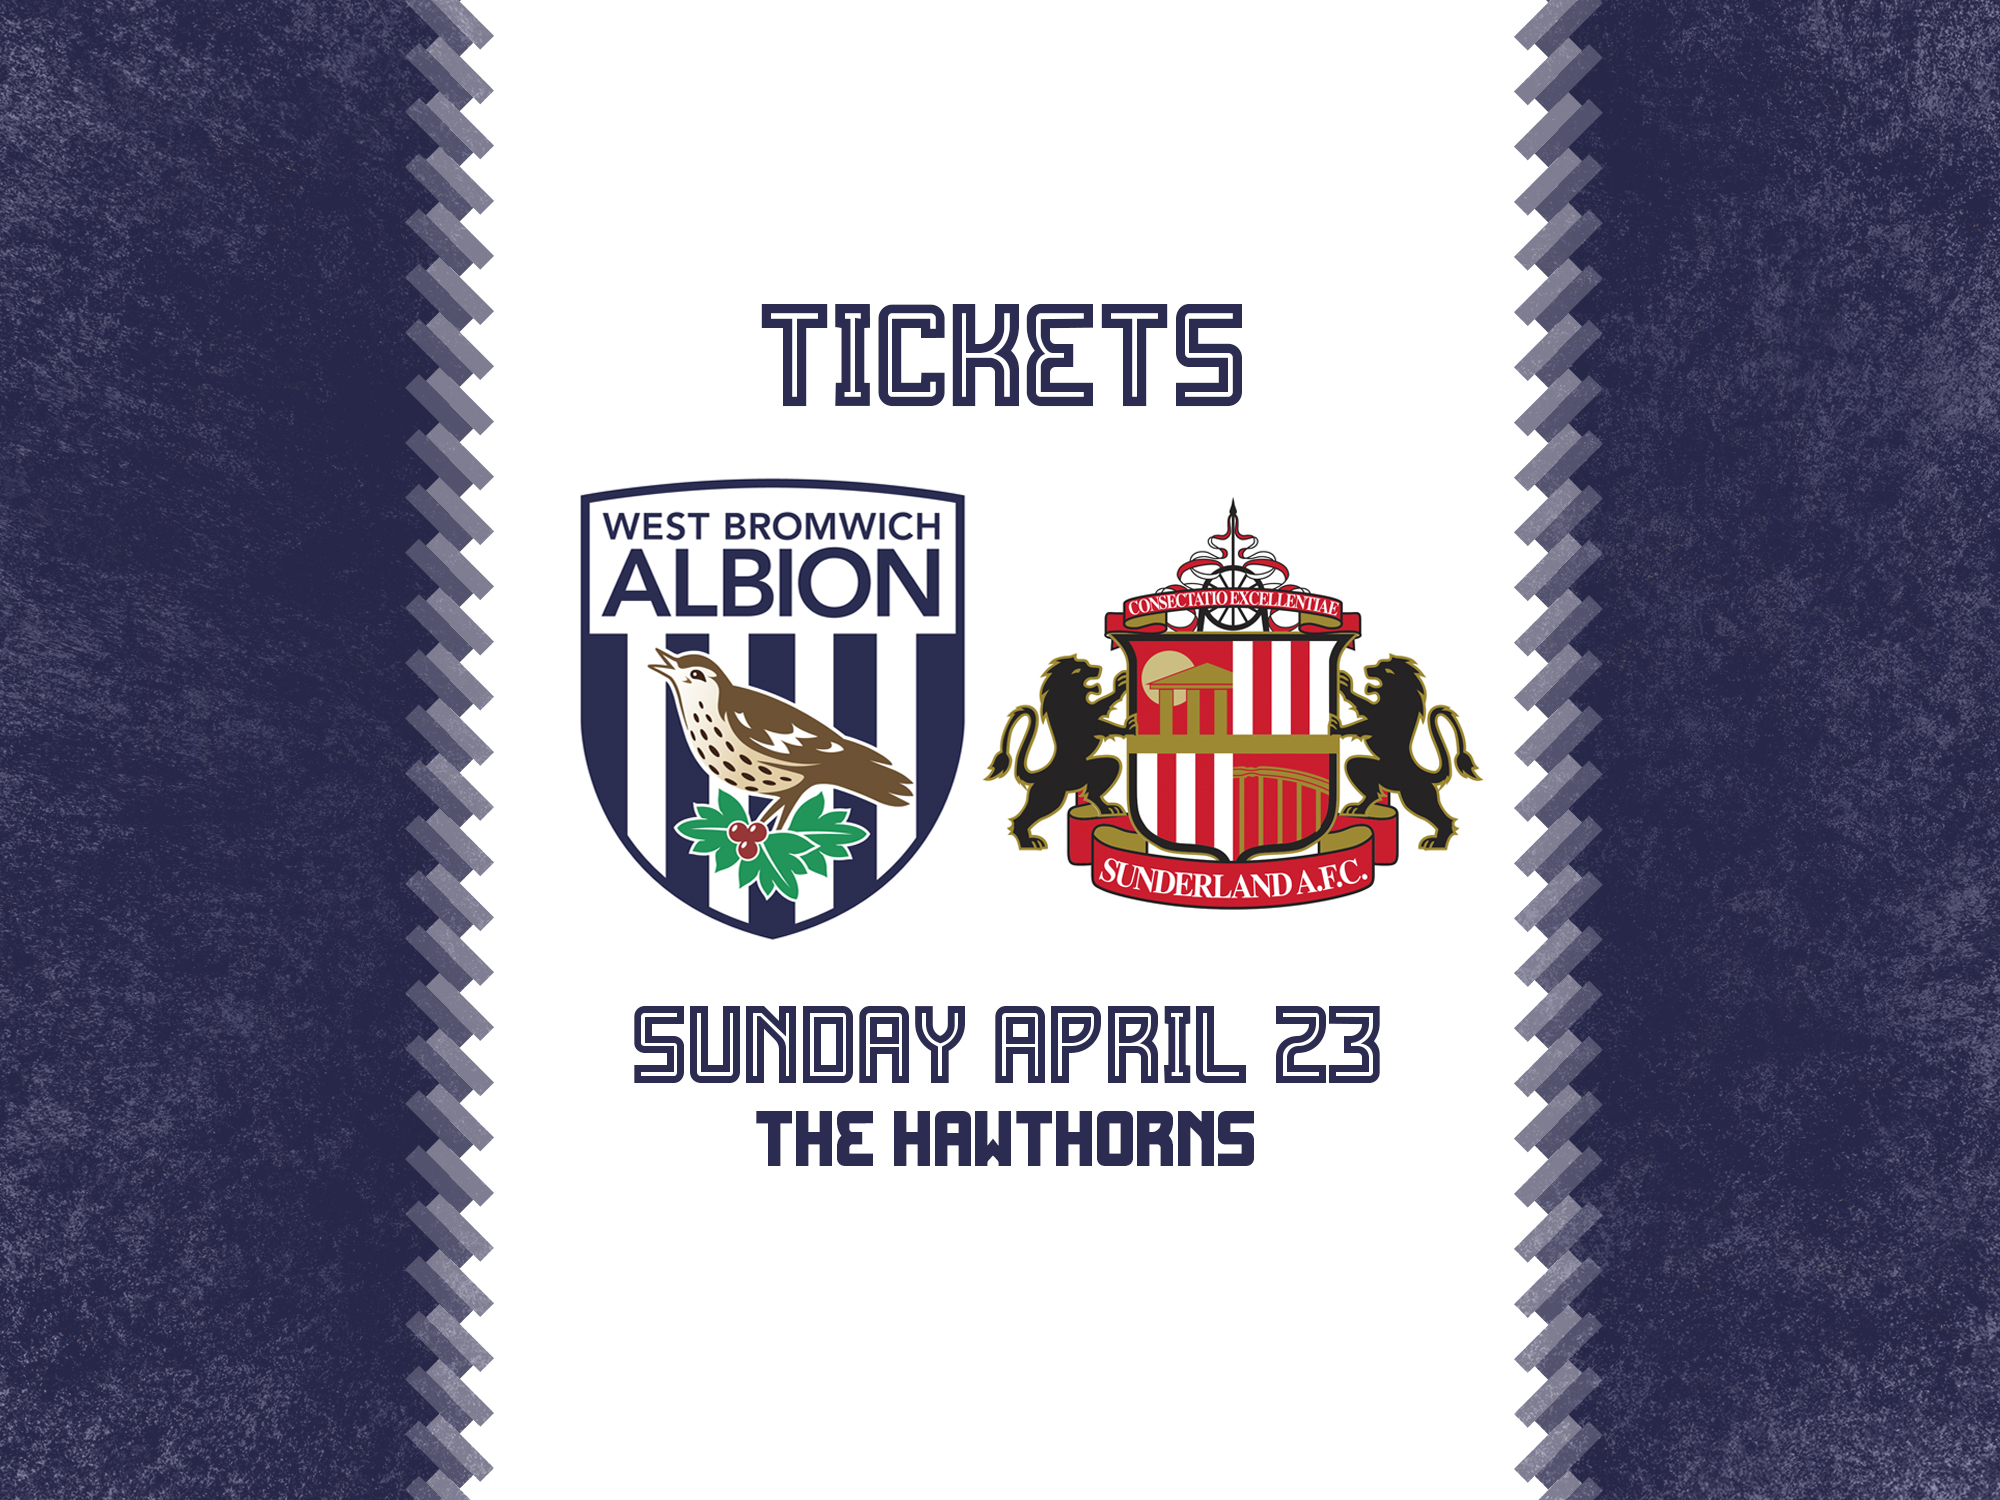 A ticket graphic for Albion's game against Sunderland